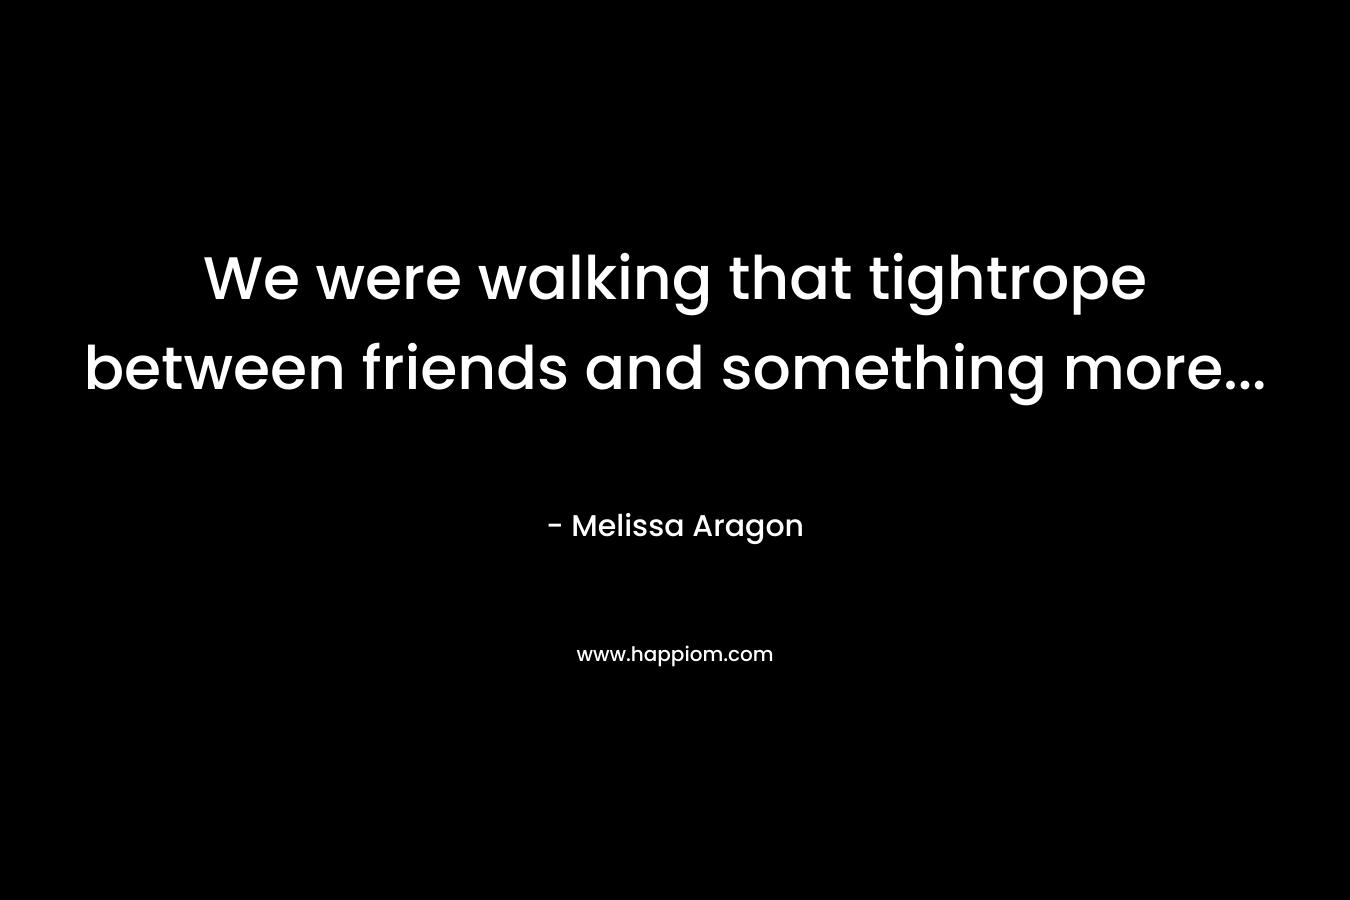 We were walking that tightrope between friends and something more...